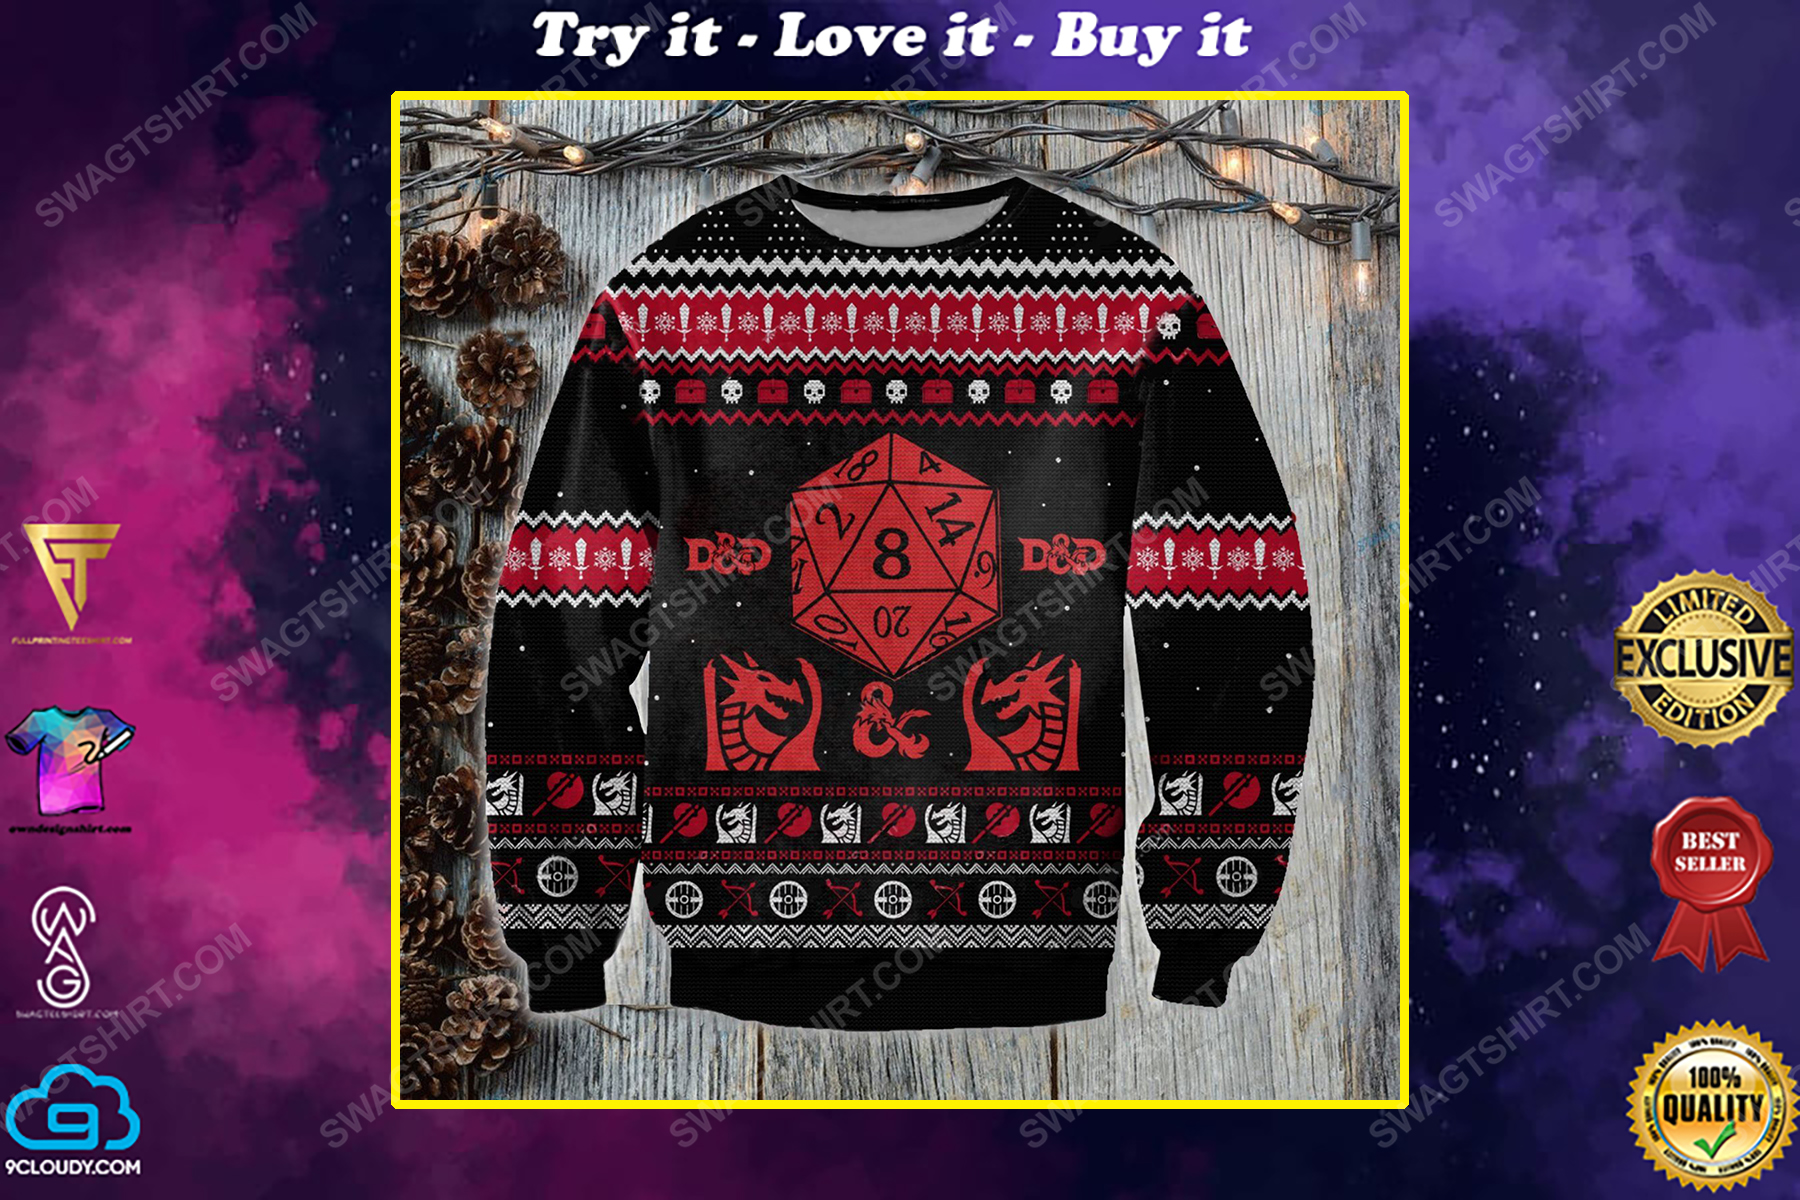 The dungeons and dragons ugly christmas sweater